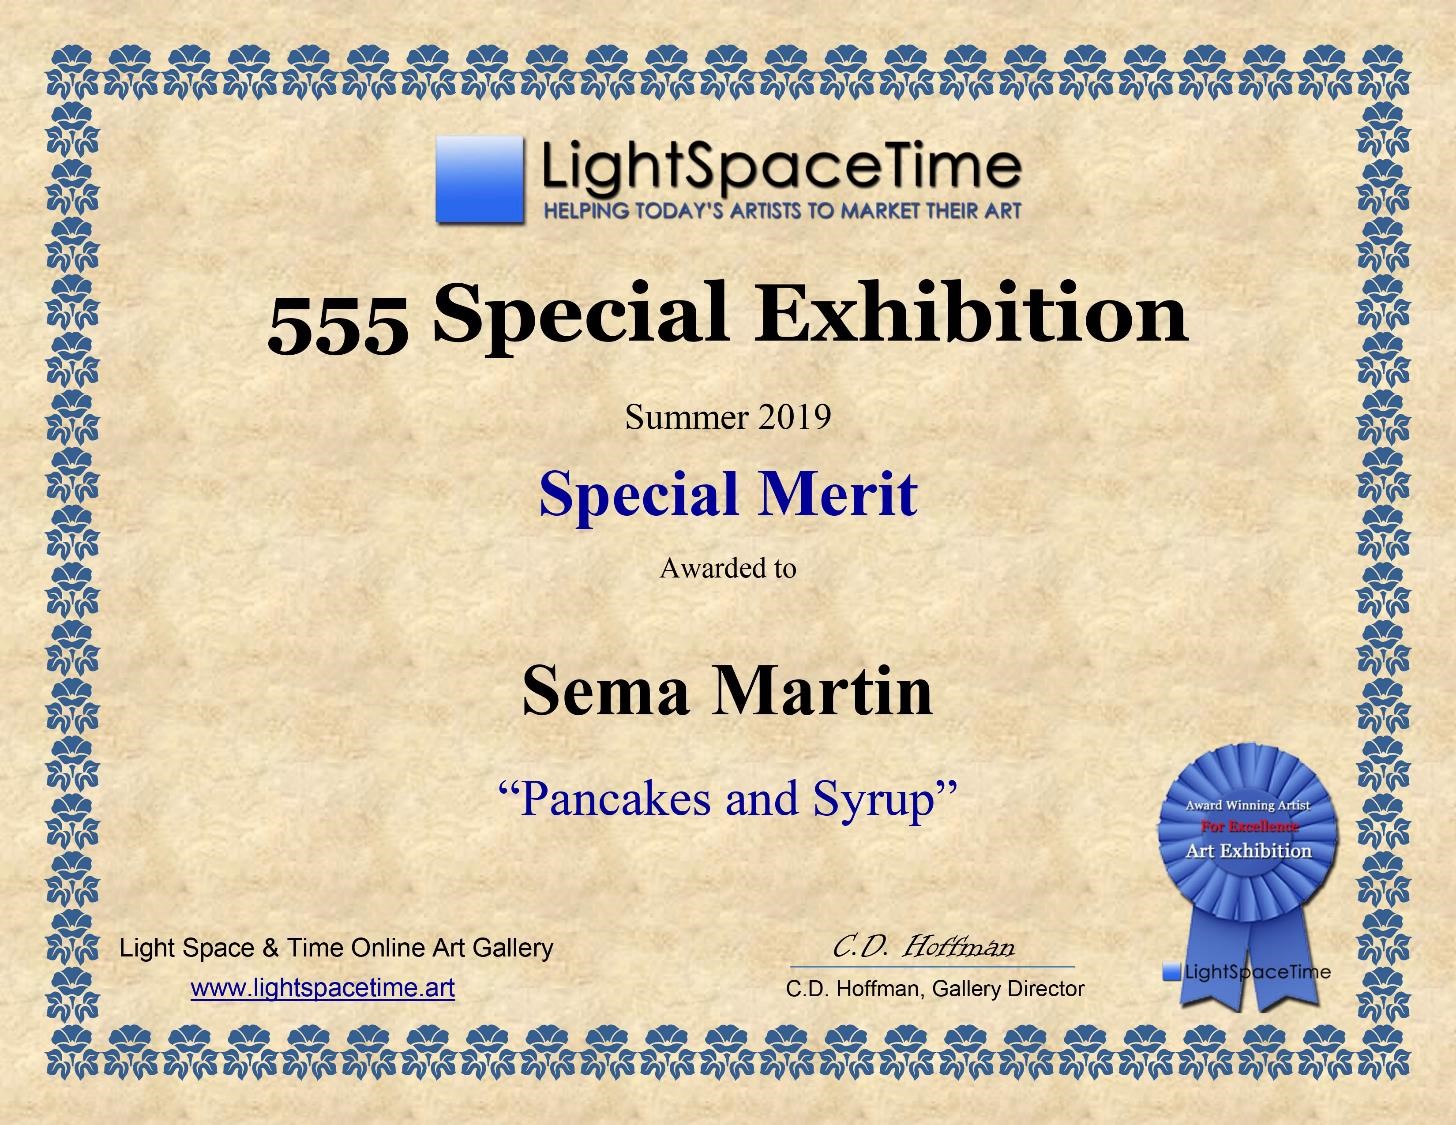 Copy of Light Space Time - 555 Special Exhibition summer 2019, Special Merit, Artist Sema Martin 'Pancakes and Syrup'